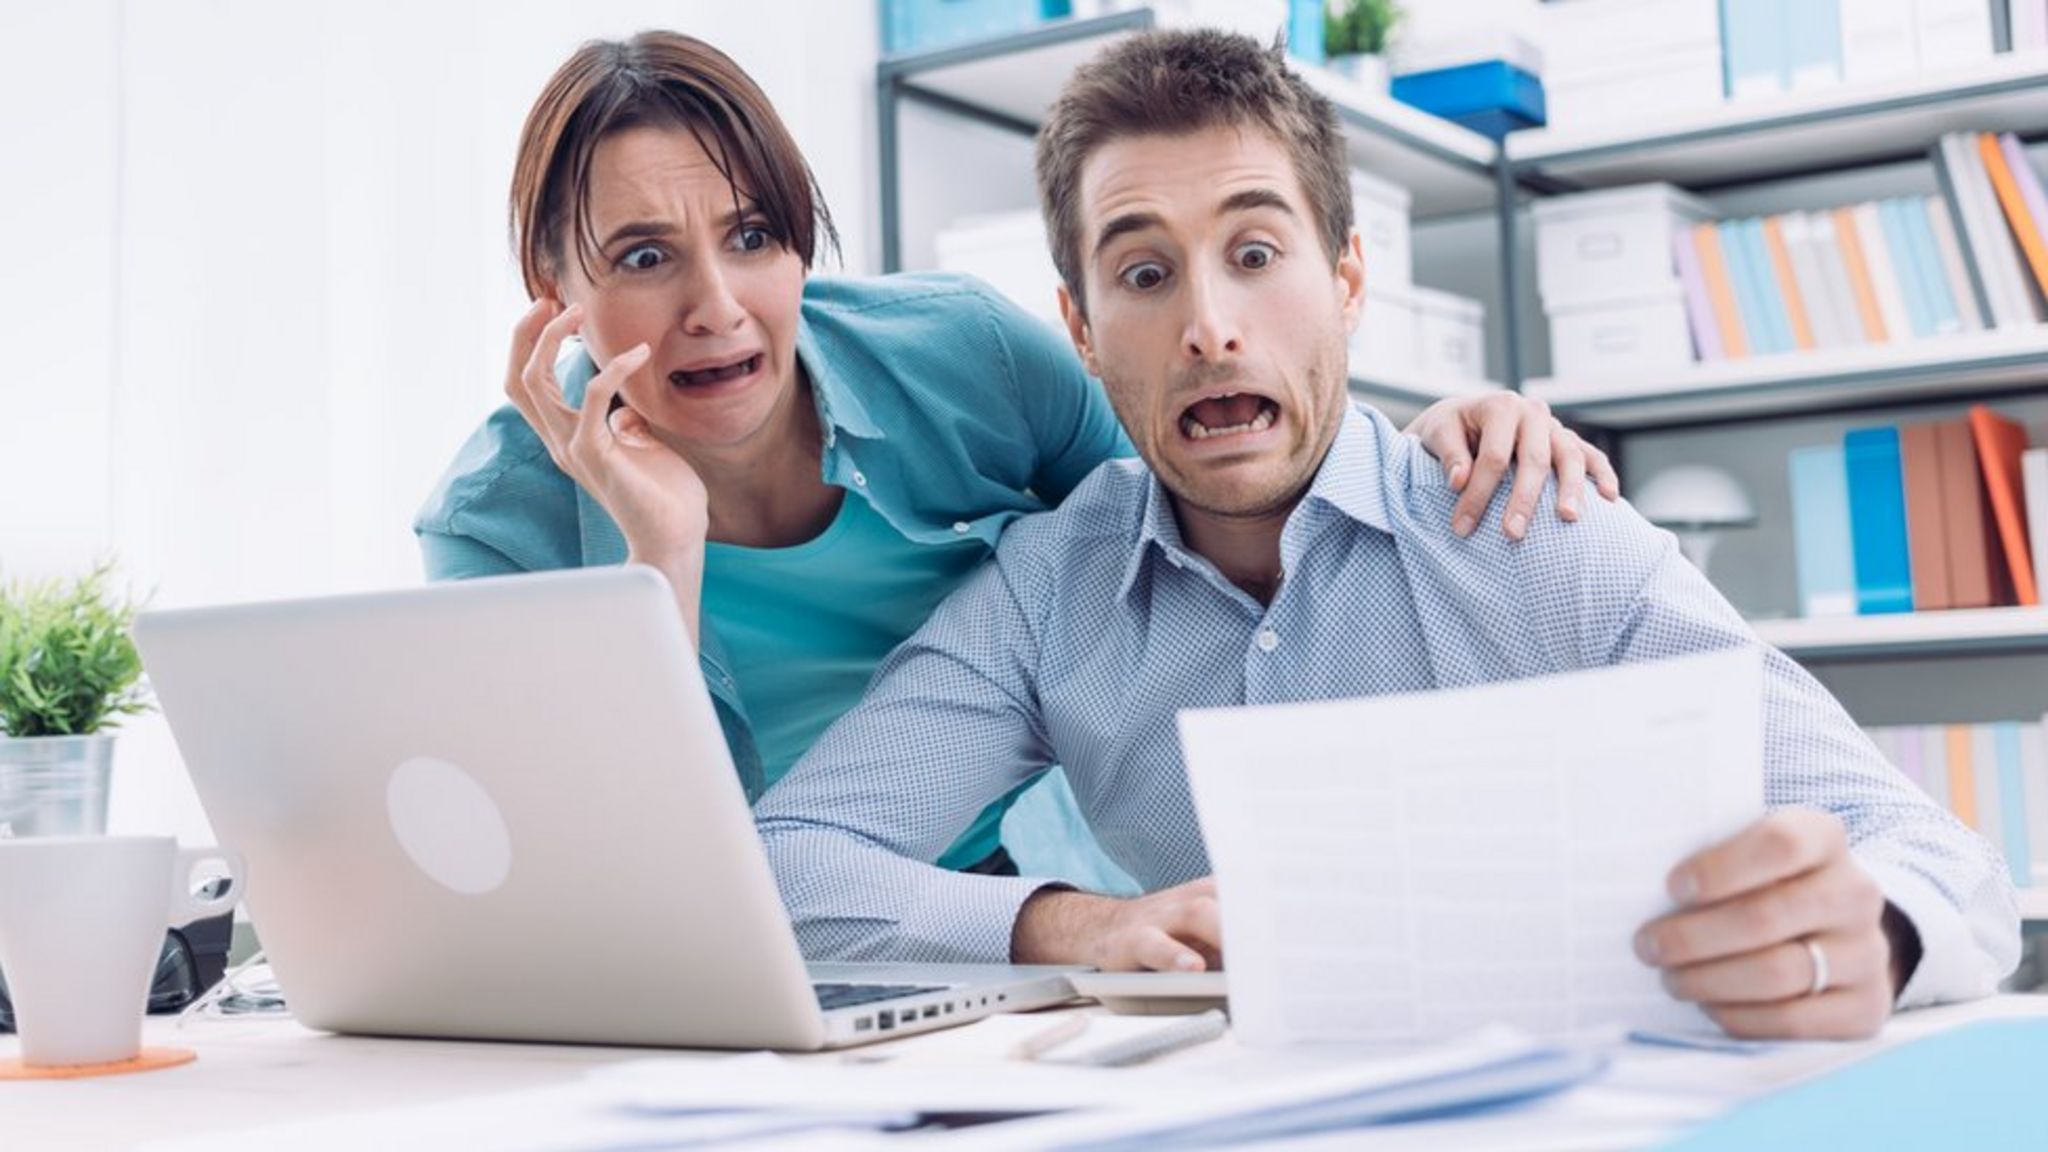 Panicking couple in office